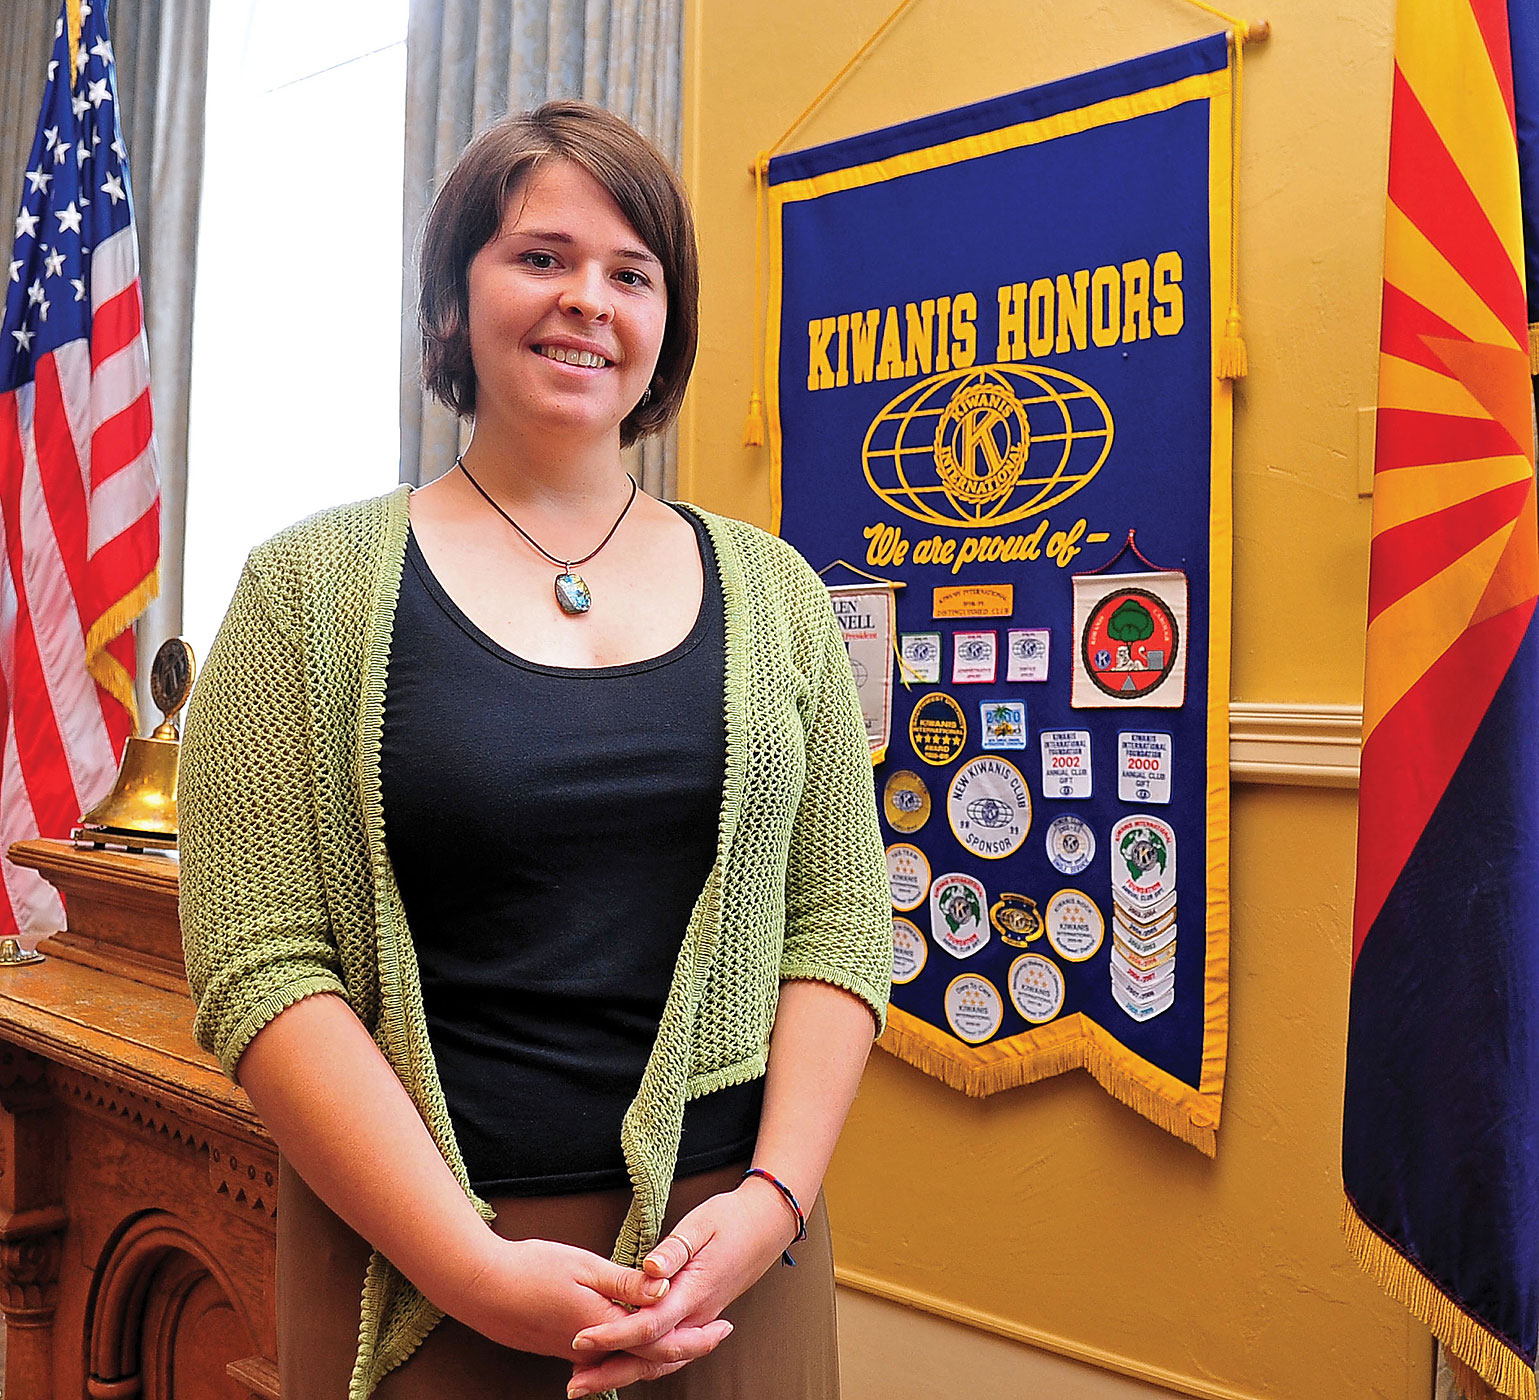 Kayla Mueller is seen after speaking to a group in Prescott, Ariz. on May 30, 2013. (Matt Hinshaw—The Daily Courier/AP)